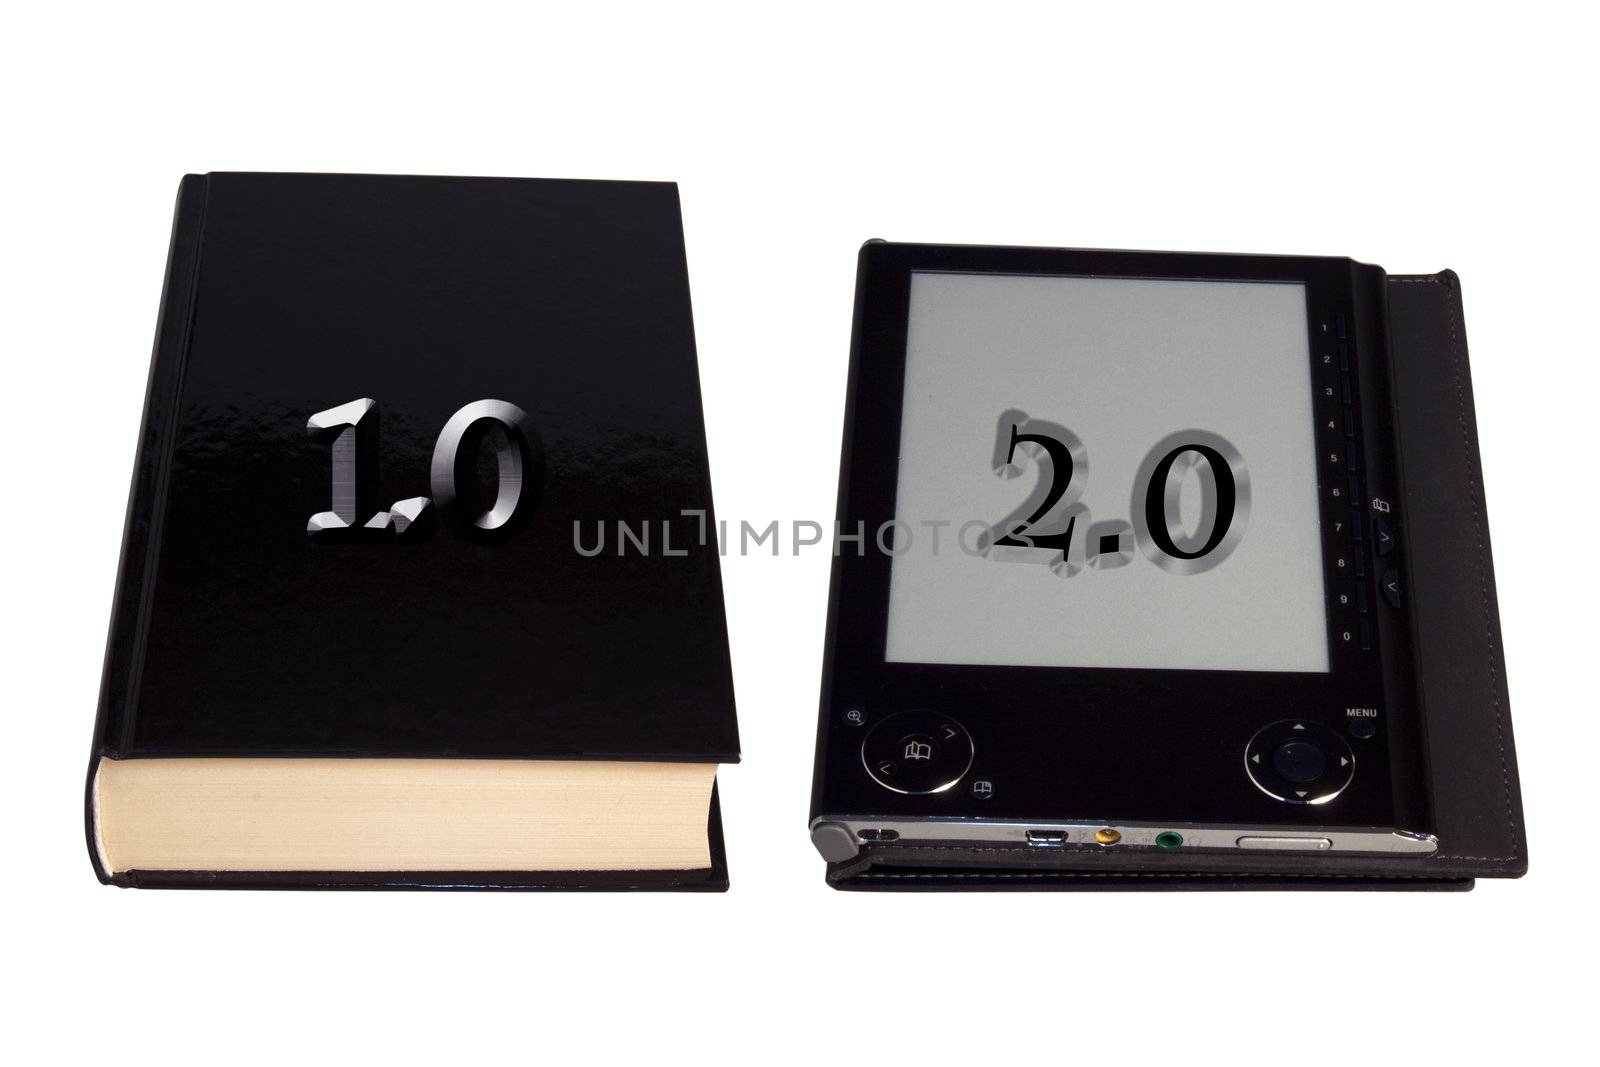 Book and eBook reader by Koufax73